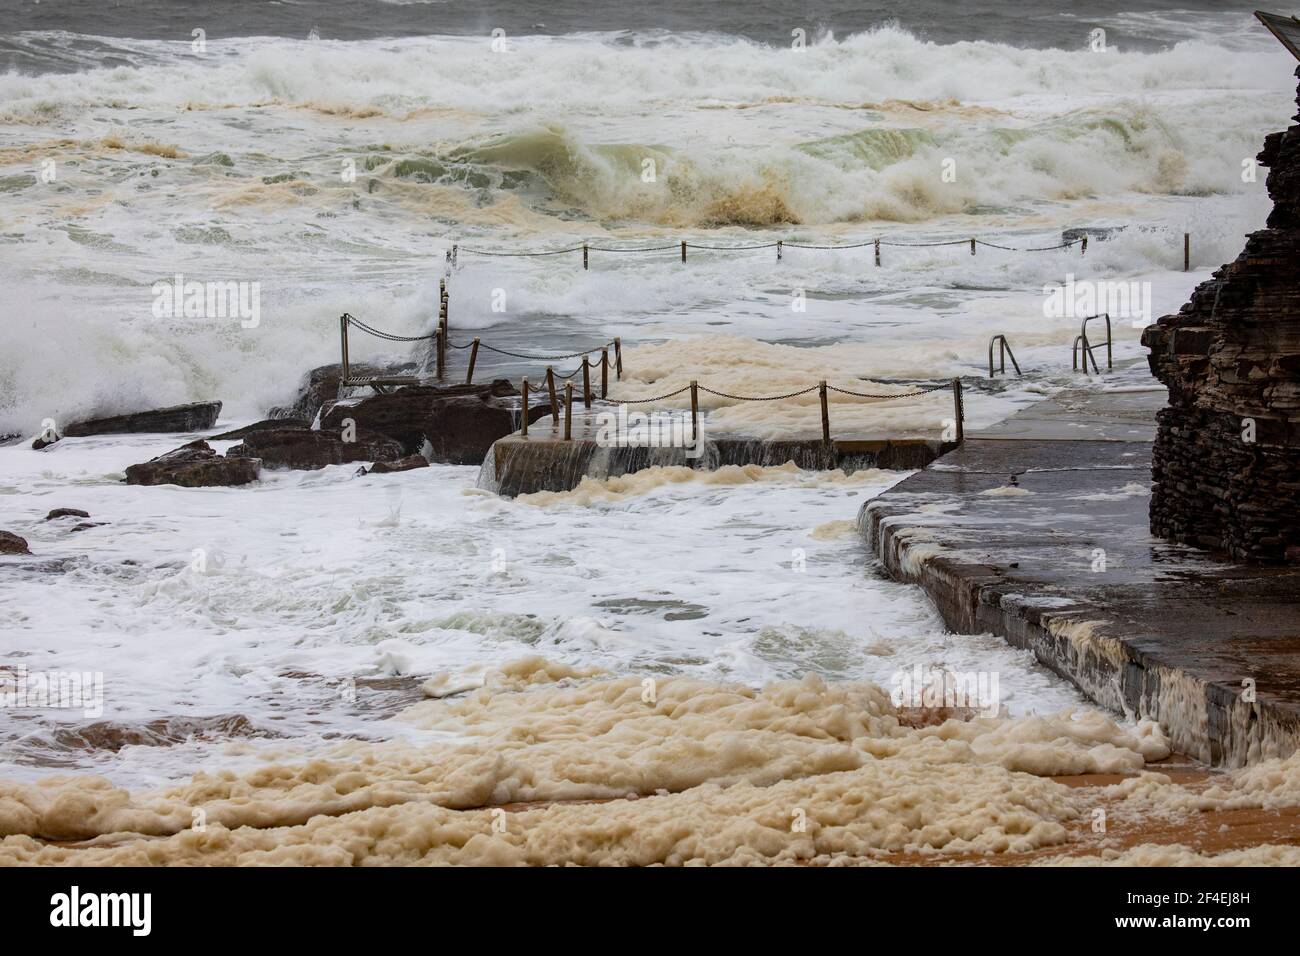 Sydney, wild weather and storms lash the coast at Avalon Beach in Sydney during the March 21 floods in NSW,Australia Stock Photo